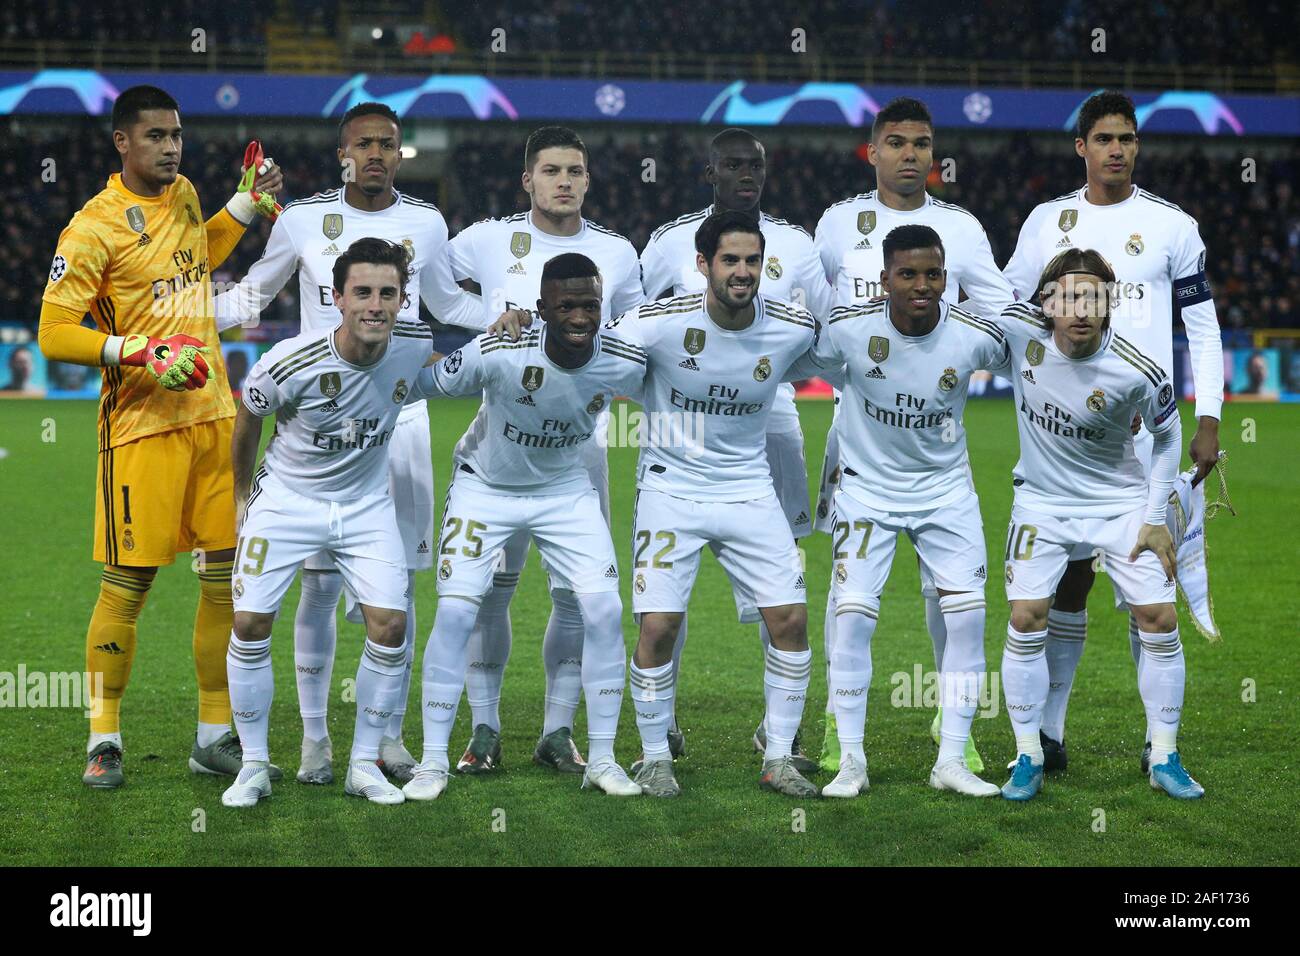 Brugge, Belgium. 11th Dec, 2019. Players of Real Madrid pose for photo  before a Group A match of the 2019-2020 UEFA Champions League between Club  Brugge and Real Madrid in Brugge, Belgium,